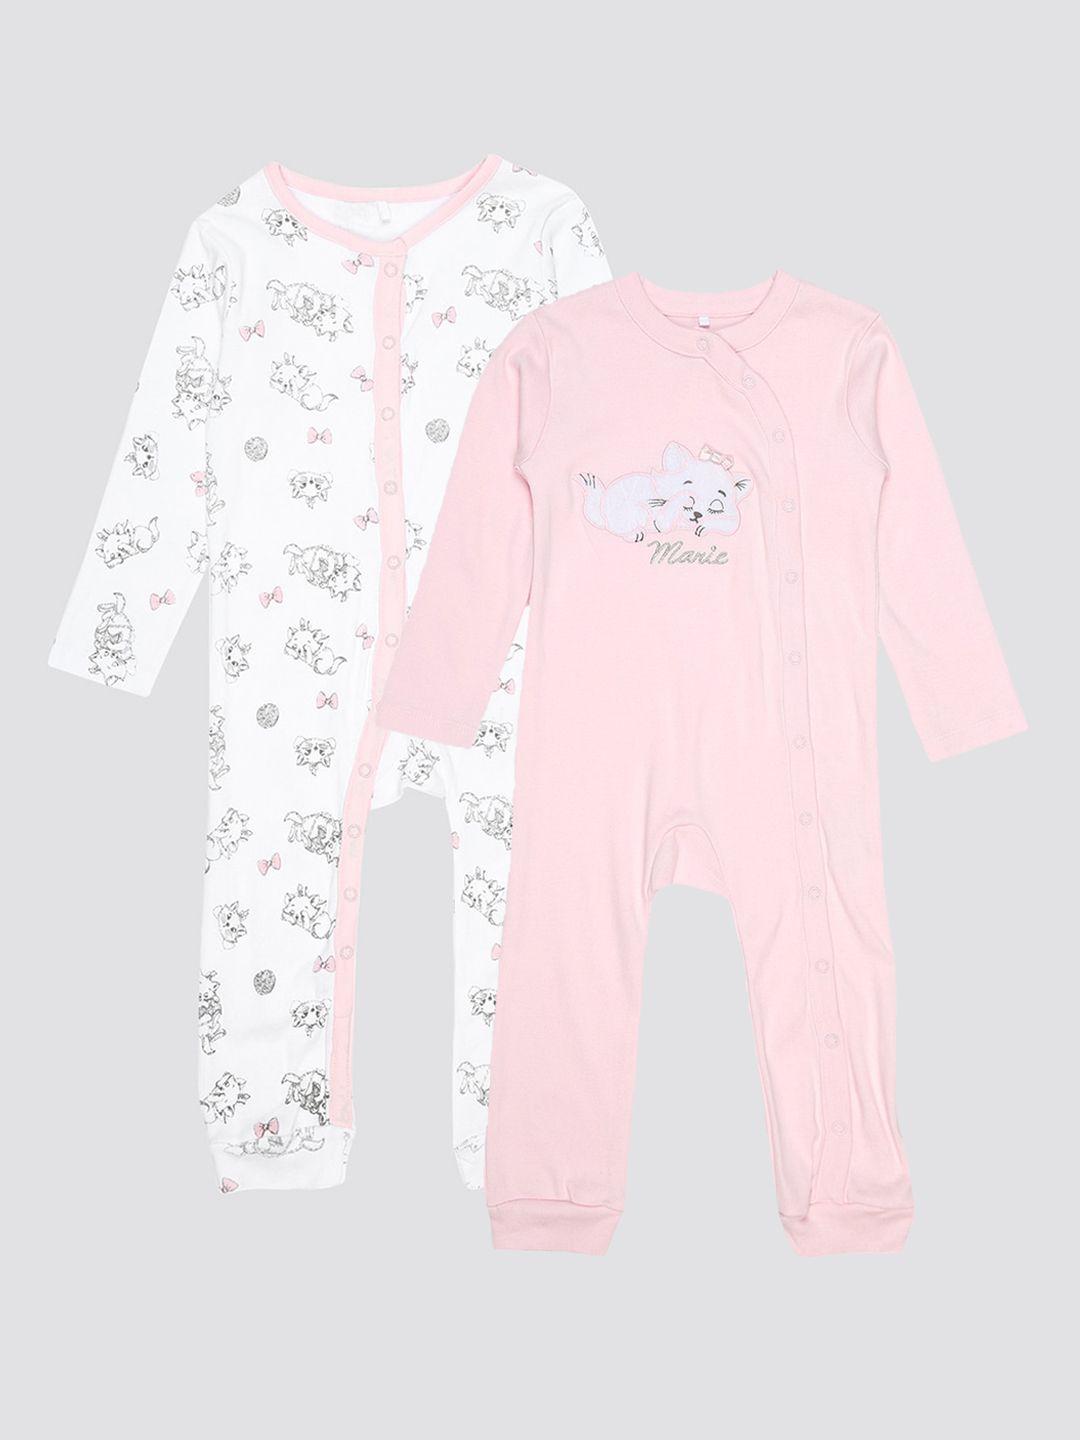 mothercare Infants Kids Pack Of 2 Printed Pure Cotton Rompers